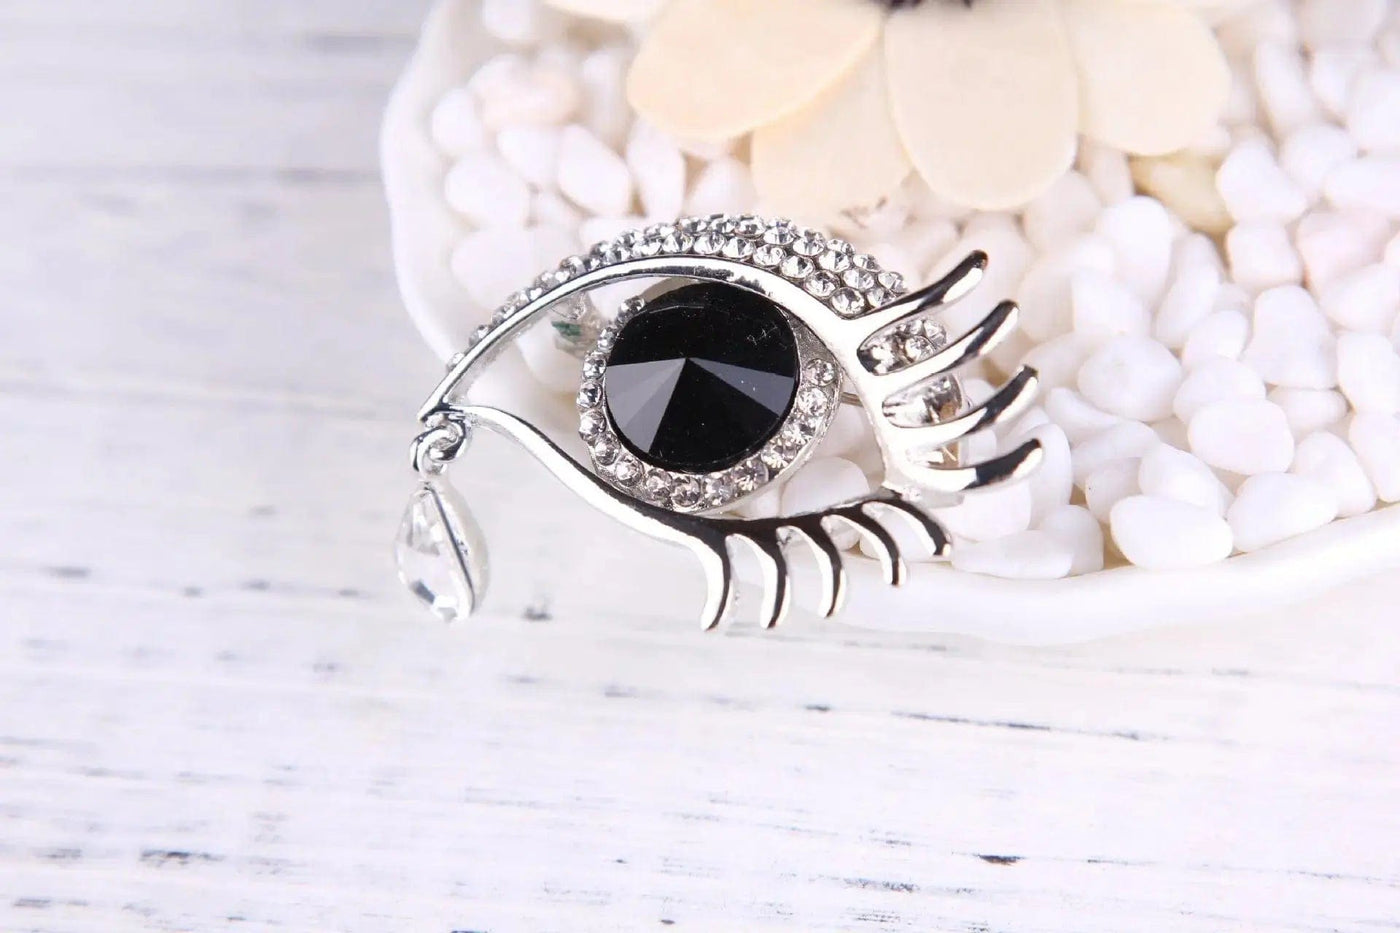 BROOCHITON Brooches diamond-encrusted tear eye design brooch silver and white